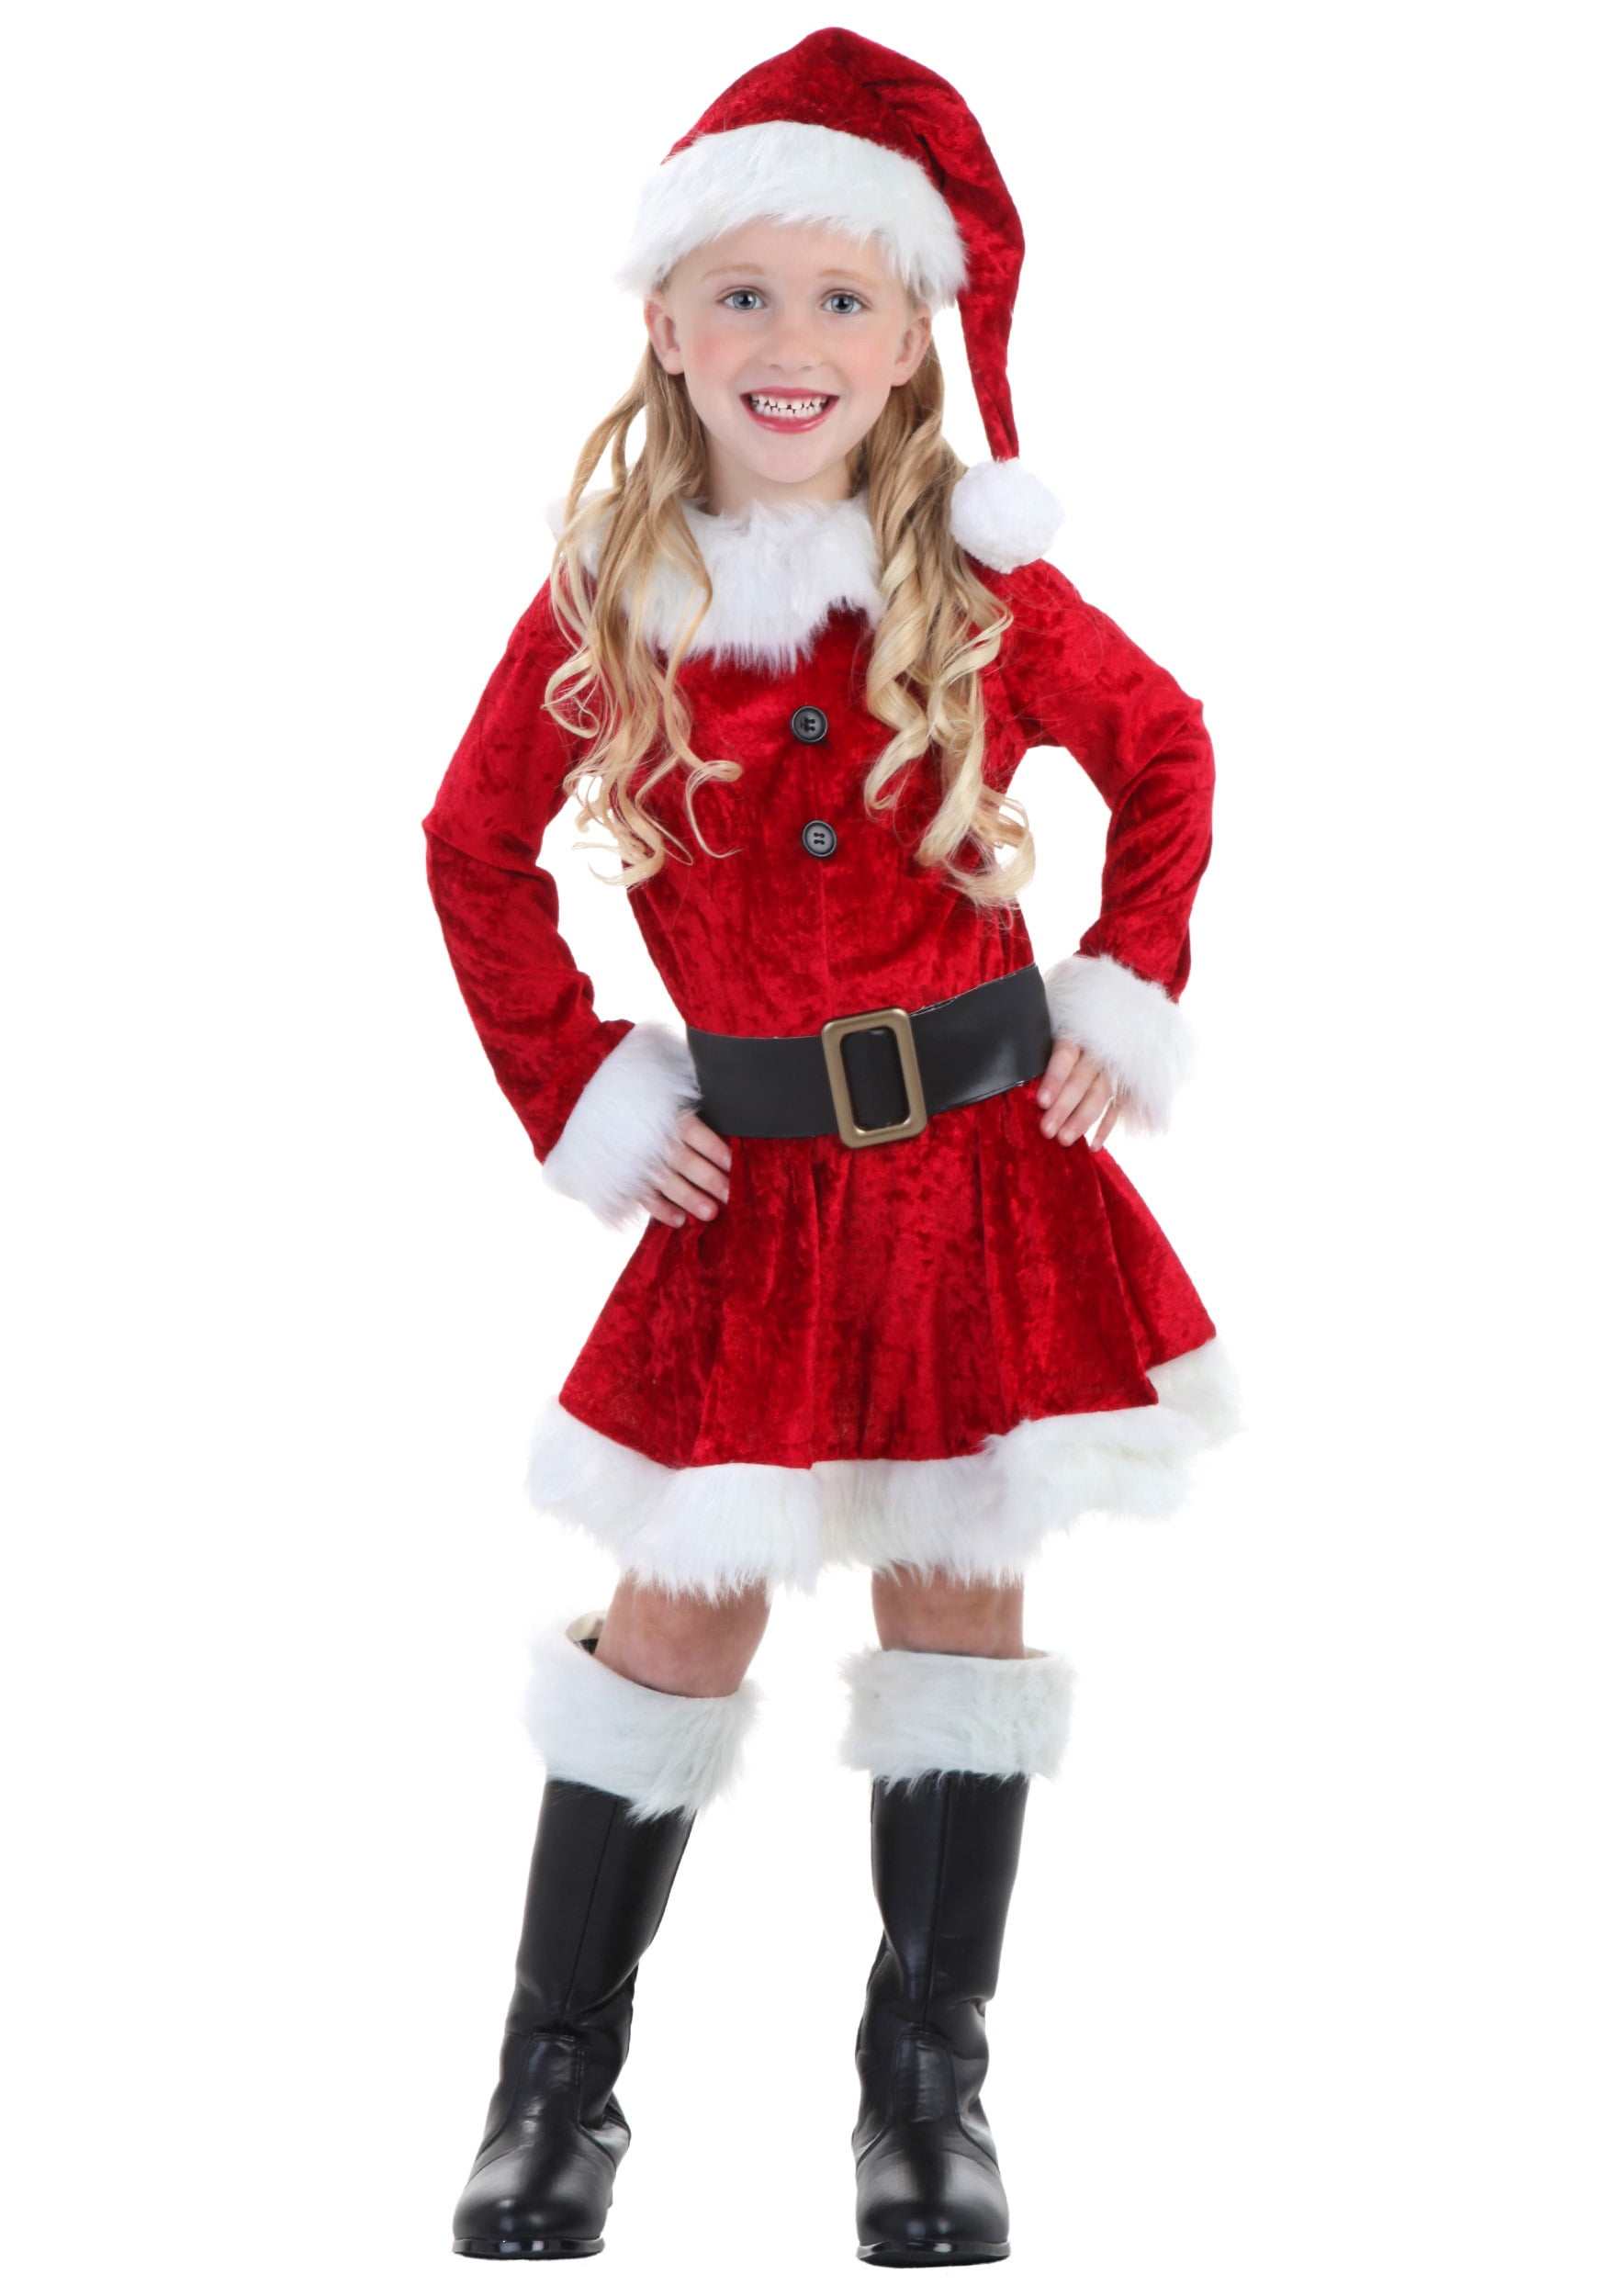 Kids Red Santa Claus Costume Girls Boys Christmas Party Xmas Fancy Dress Outfits 